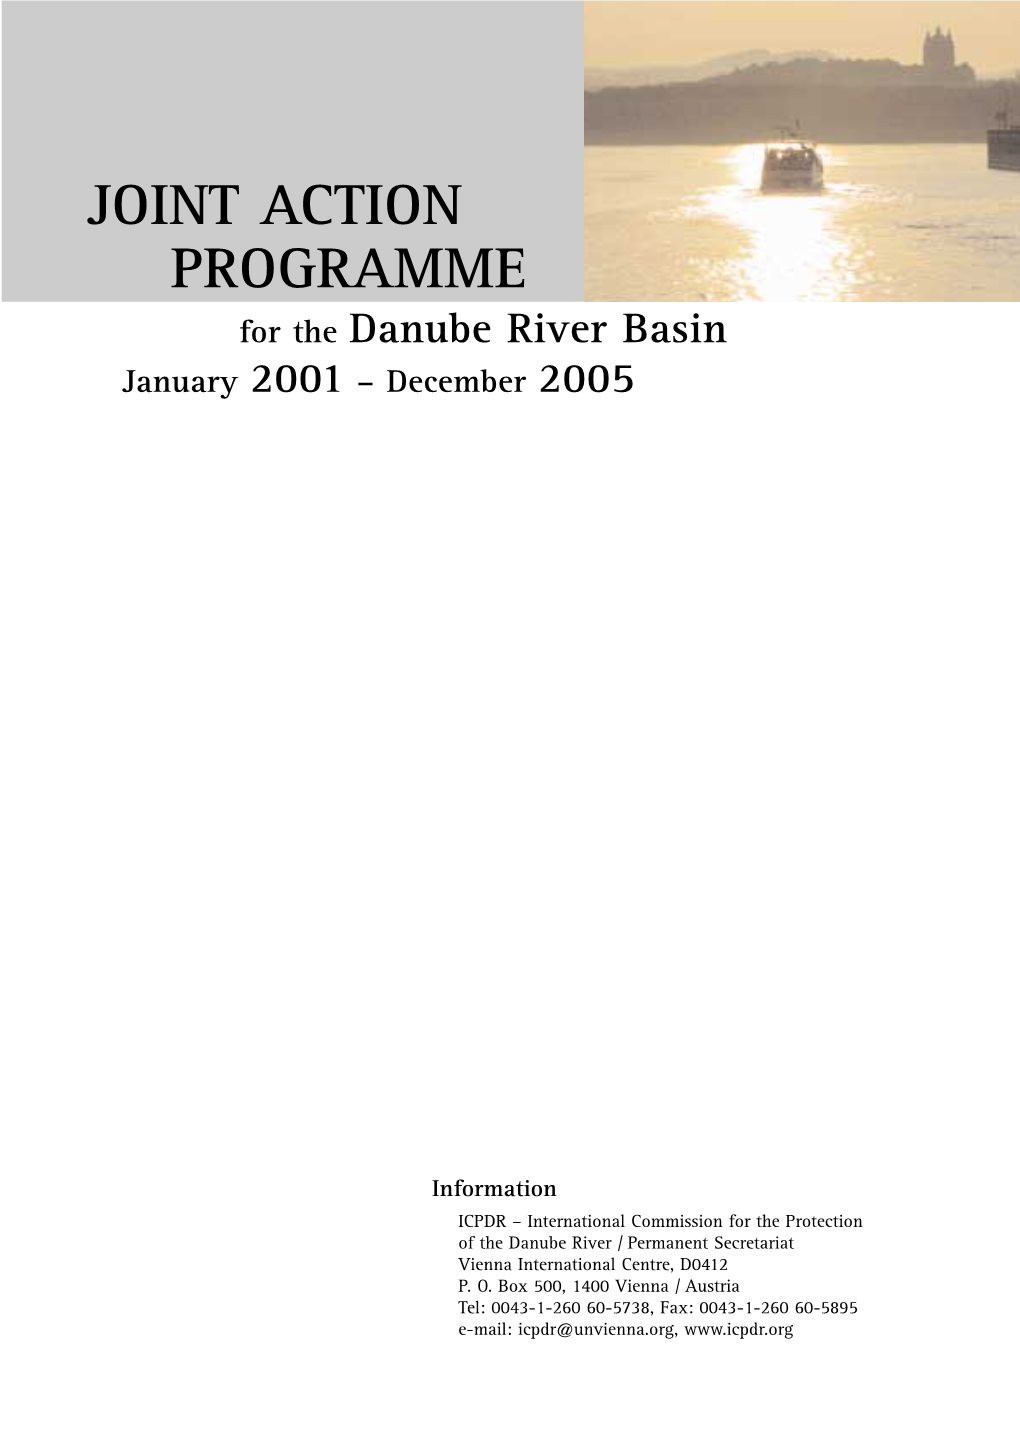 Joint Action Programme for the Danube River Basin 2001-2005